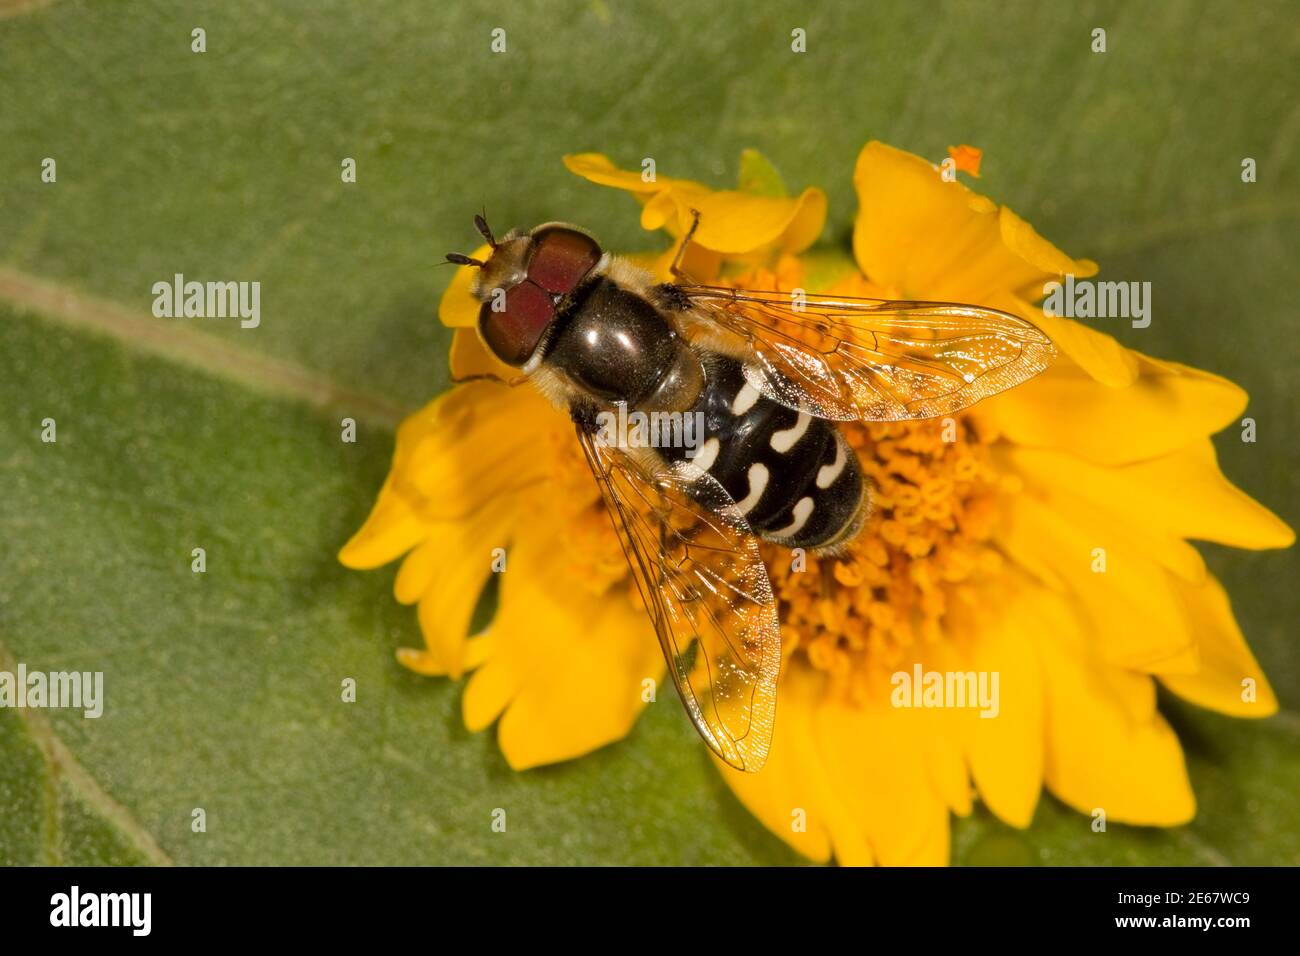 Syrphid Fly male, Scaeva affinis, Syrphidae. Body Length 15 mm. Larva images 14100412-14100433 on 10-13-14. Stock Photo